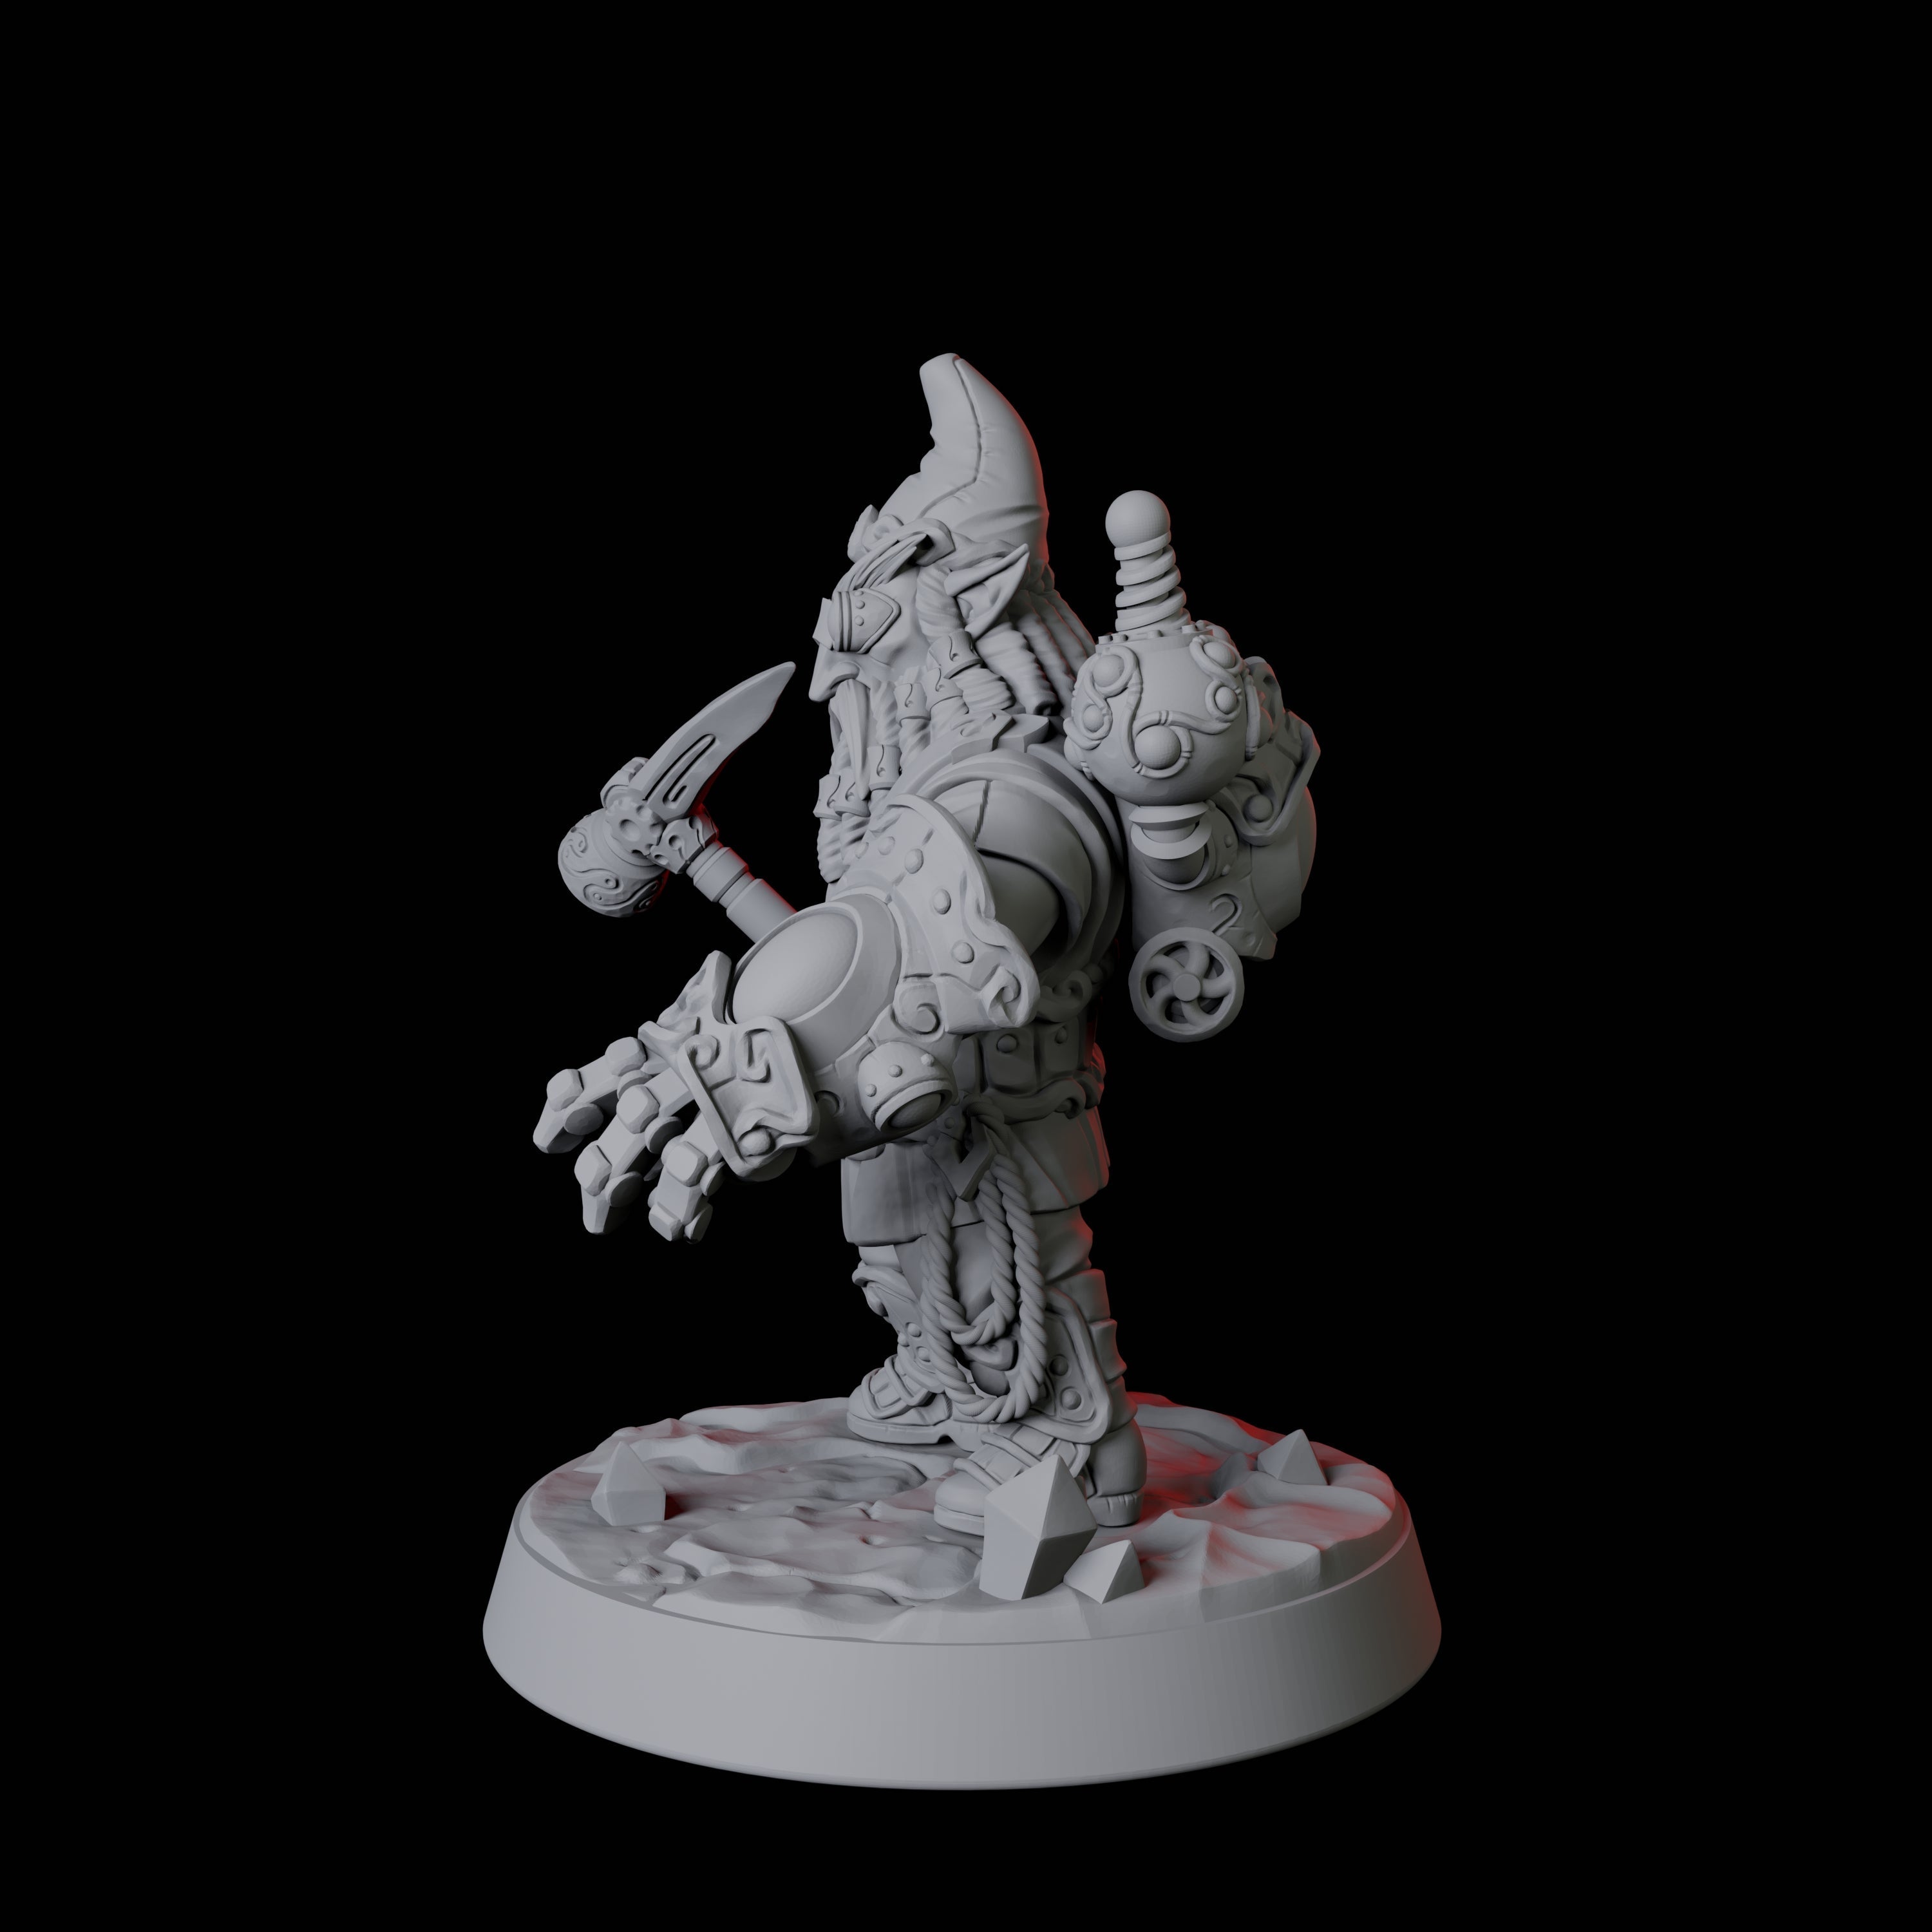 Deep Gnome Artificer A Miniature for Dungeons and Dragons, Pathfinder or other TTRPGs